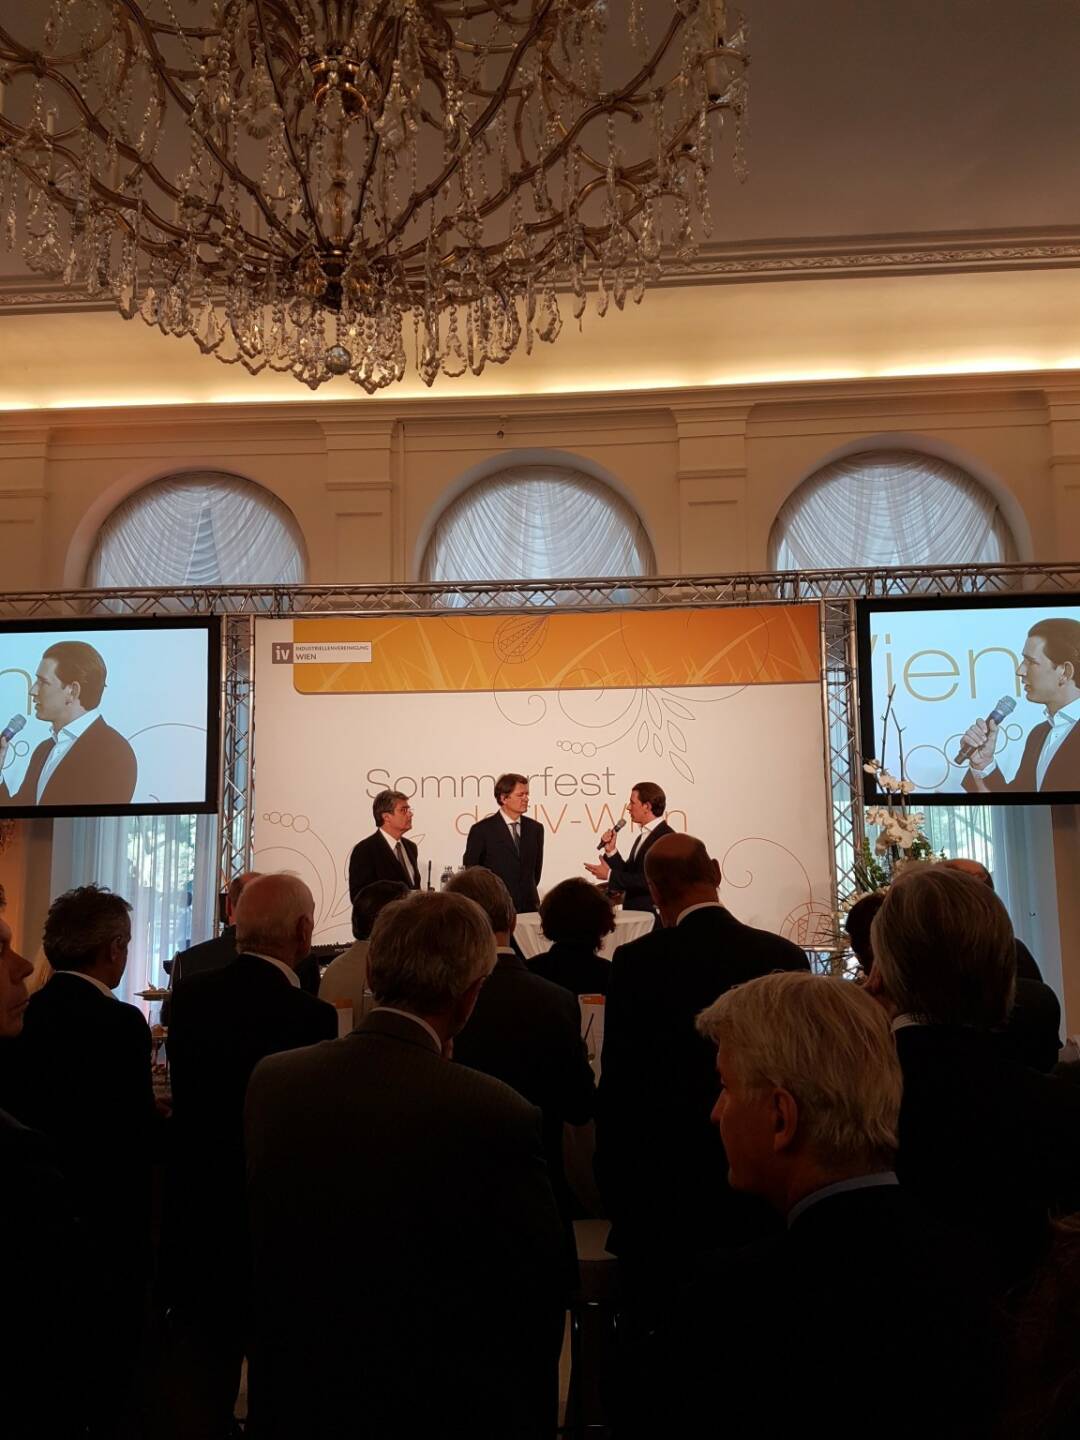 Wiener Börse - New Austrian People's Party leader Sebastian Kurz positively acknowledges the work of our new CEO Christoph Boschan von dem Bussche at the summer event of Federation of Austrian Industry
